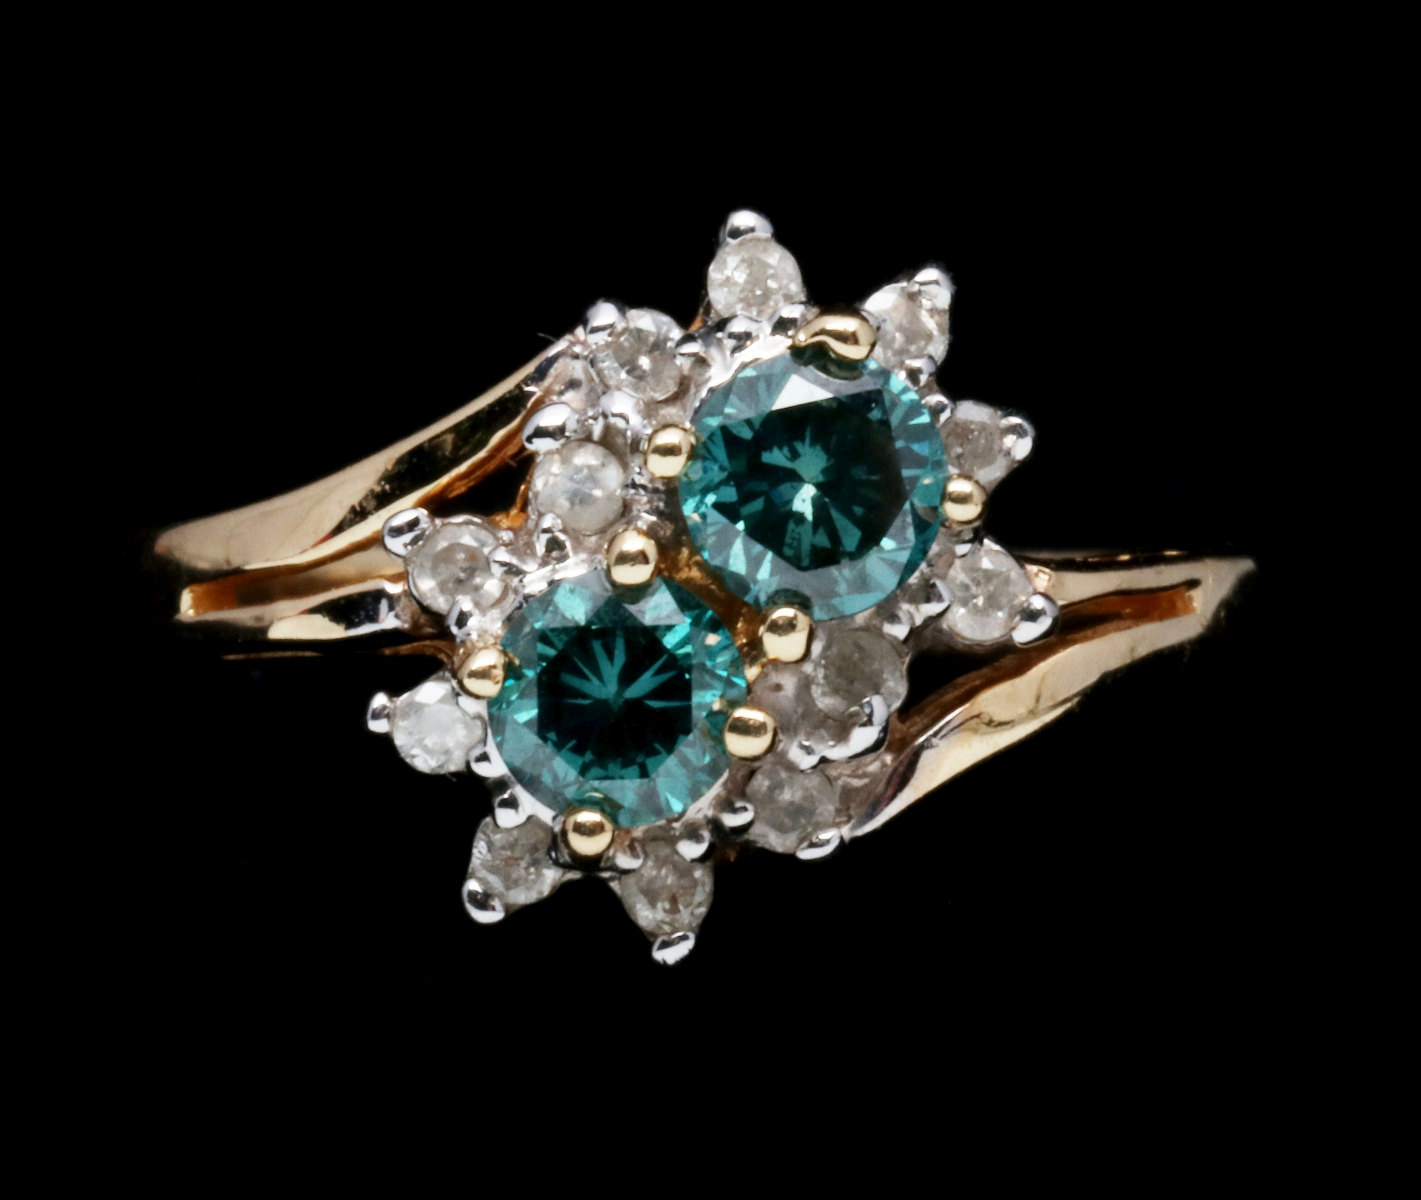 A 14K GOLD COCKTAIL RING WITH BLUE DIAMONDS